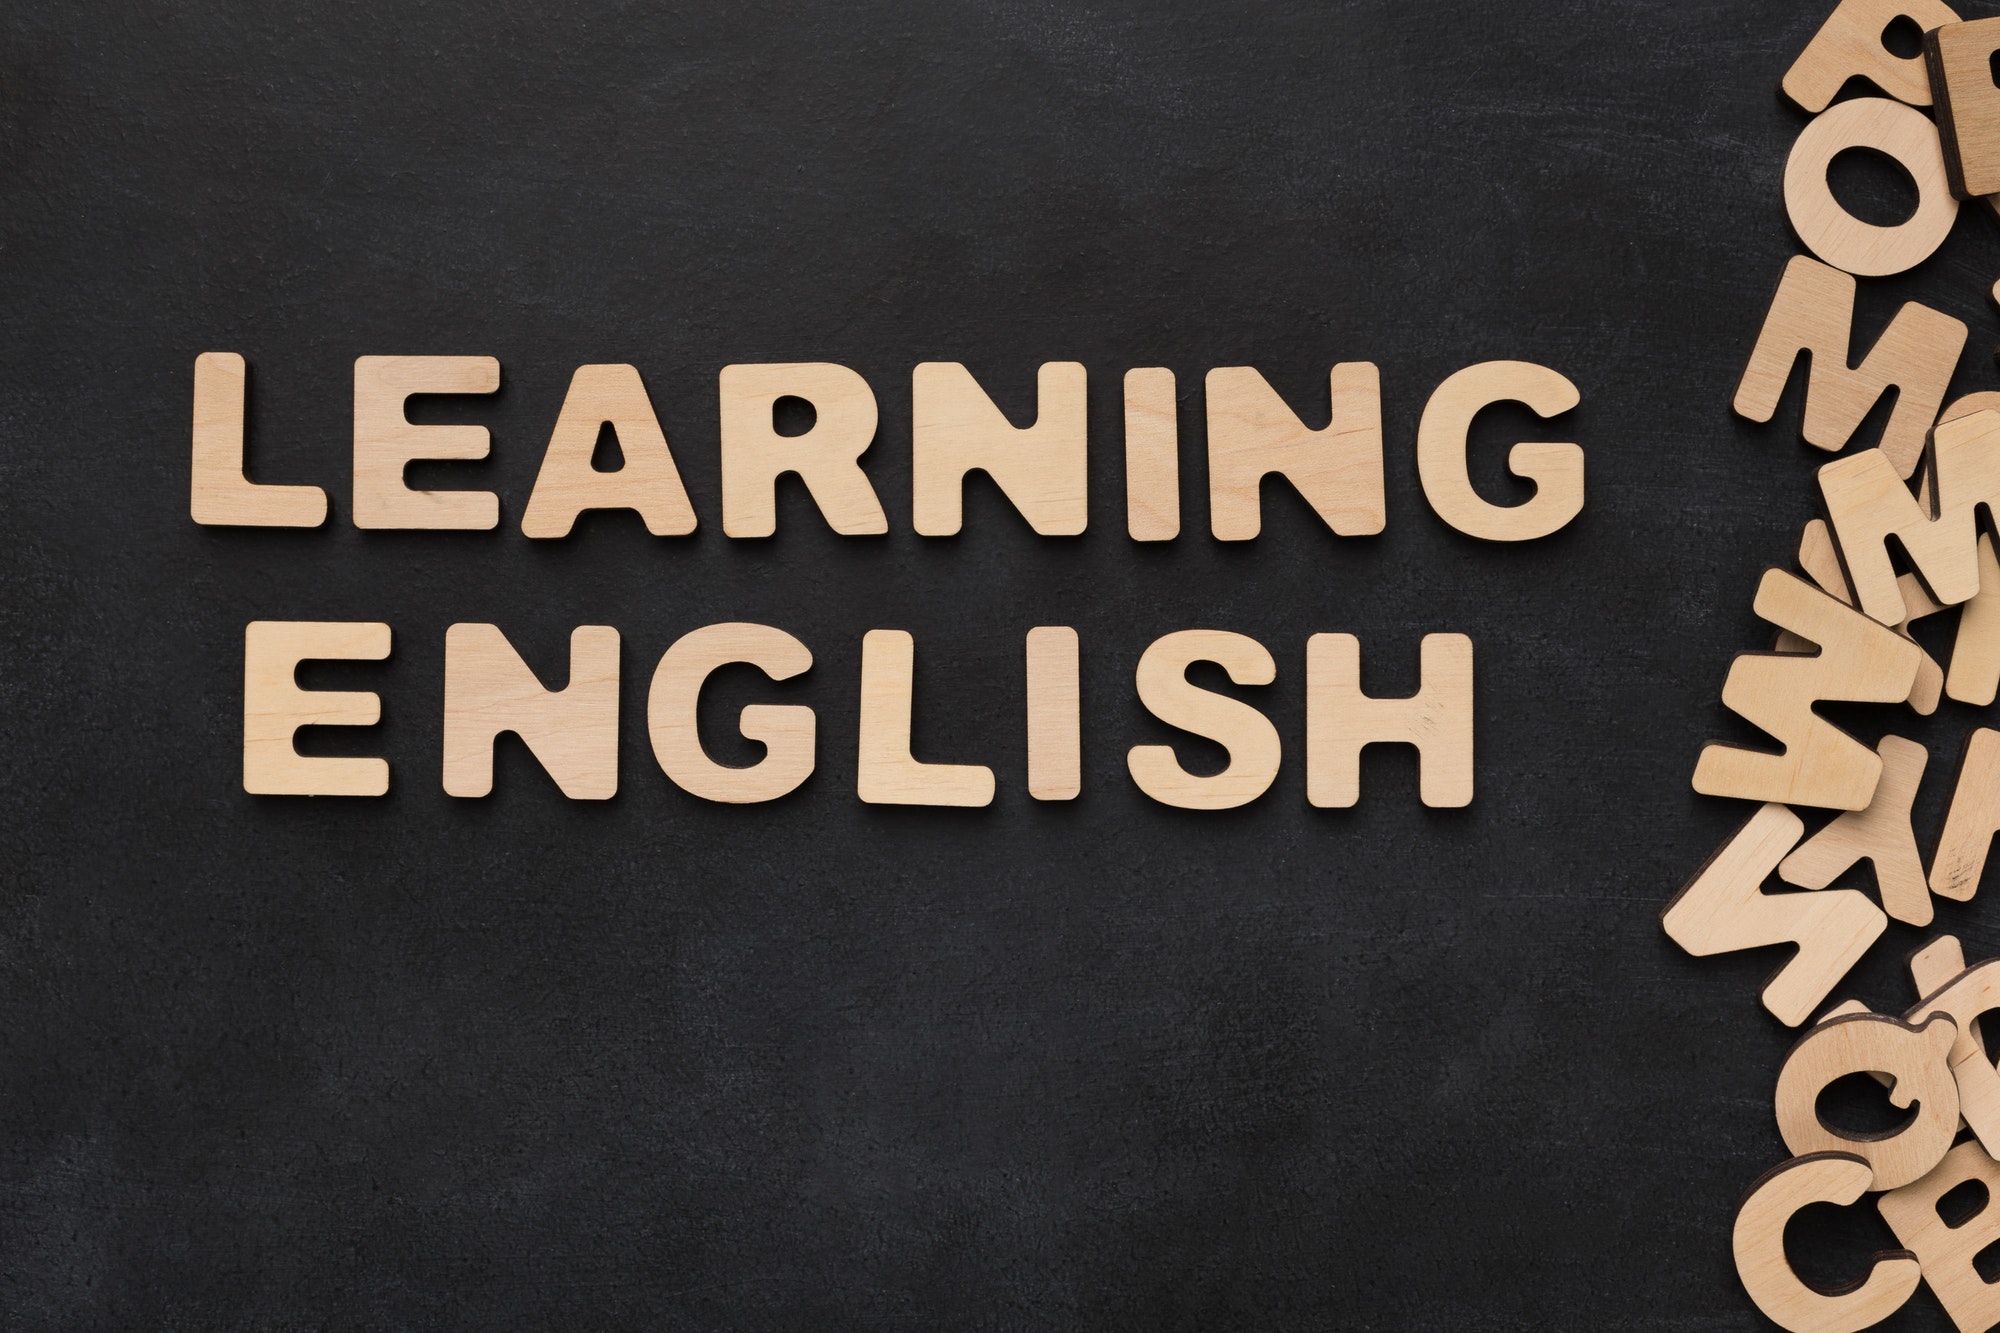 Learning English spelled with wooden letters on black background